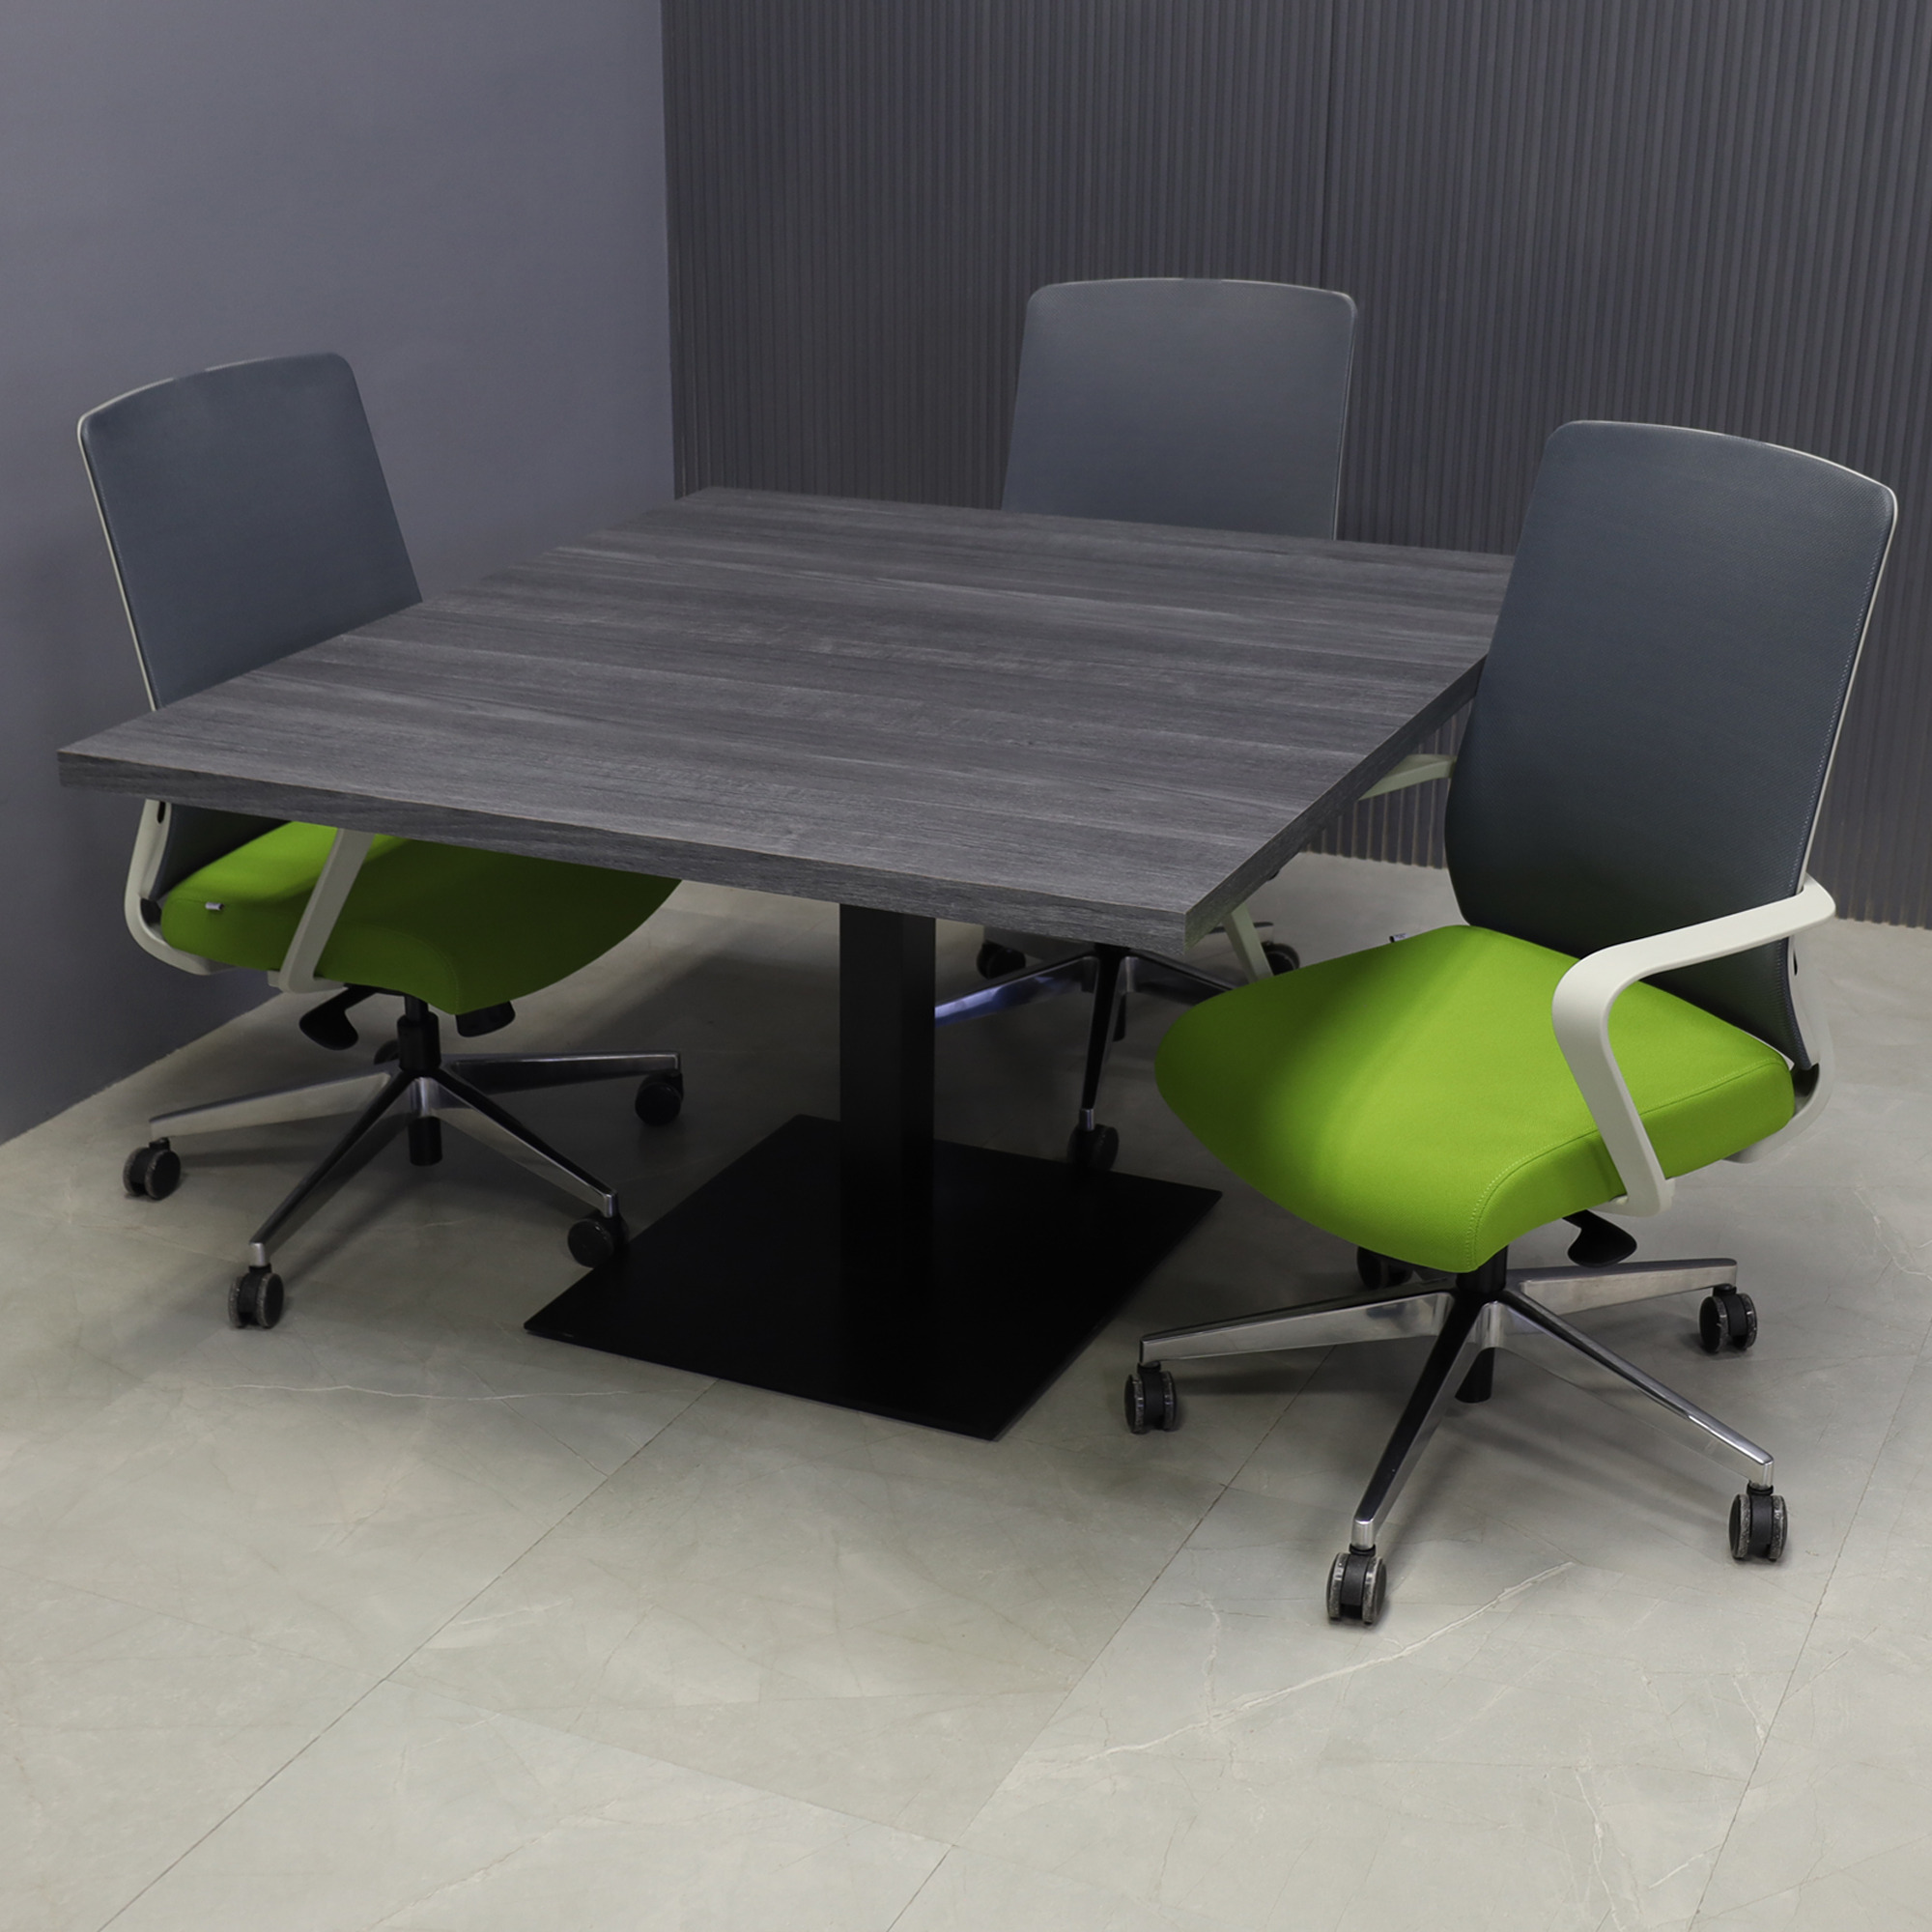 48-inch California Square Conference Table with Laminate Top in storm teakwood matte and black stainless steel base, shown here.